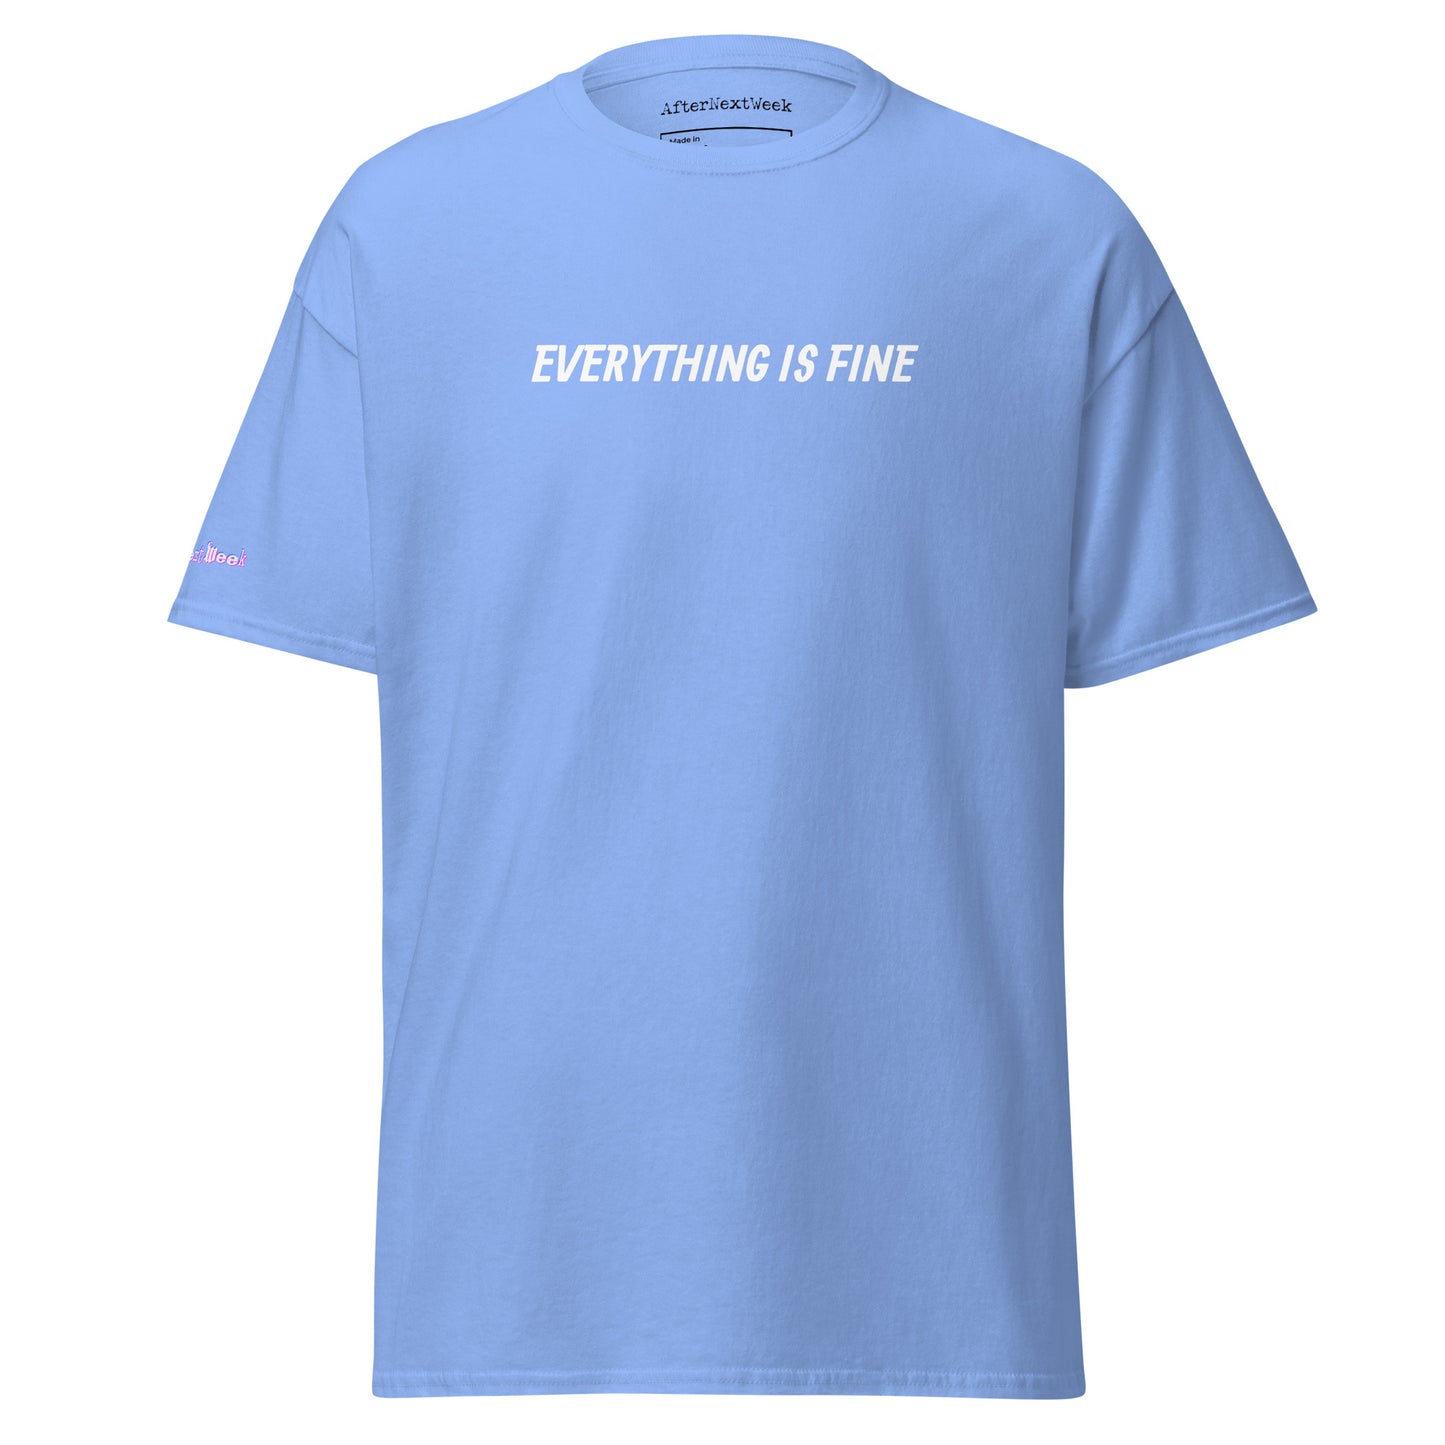 Everything is Fine #007 - Customizable